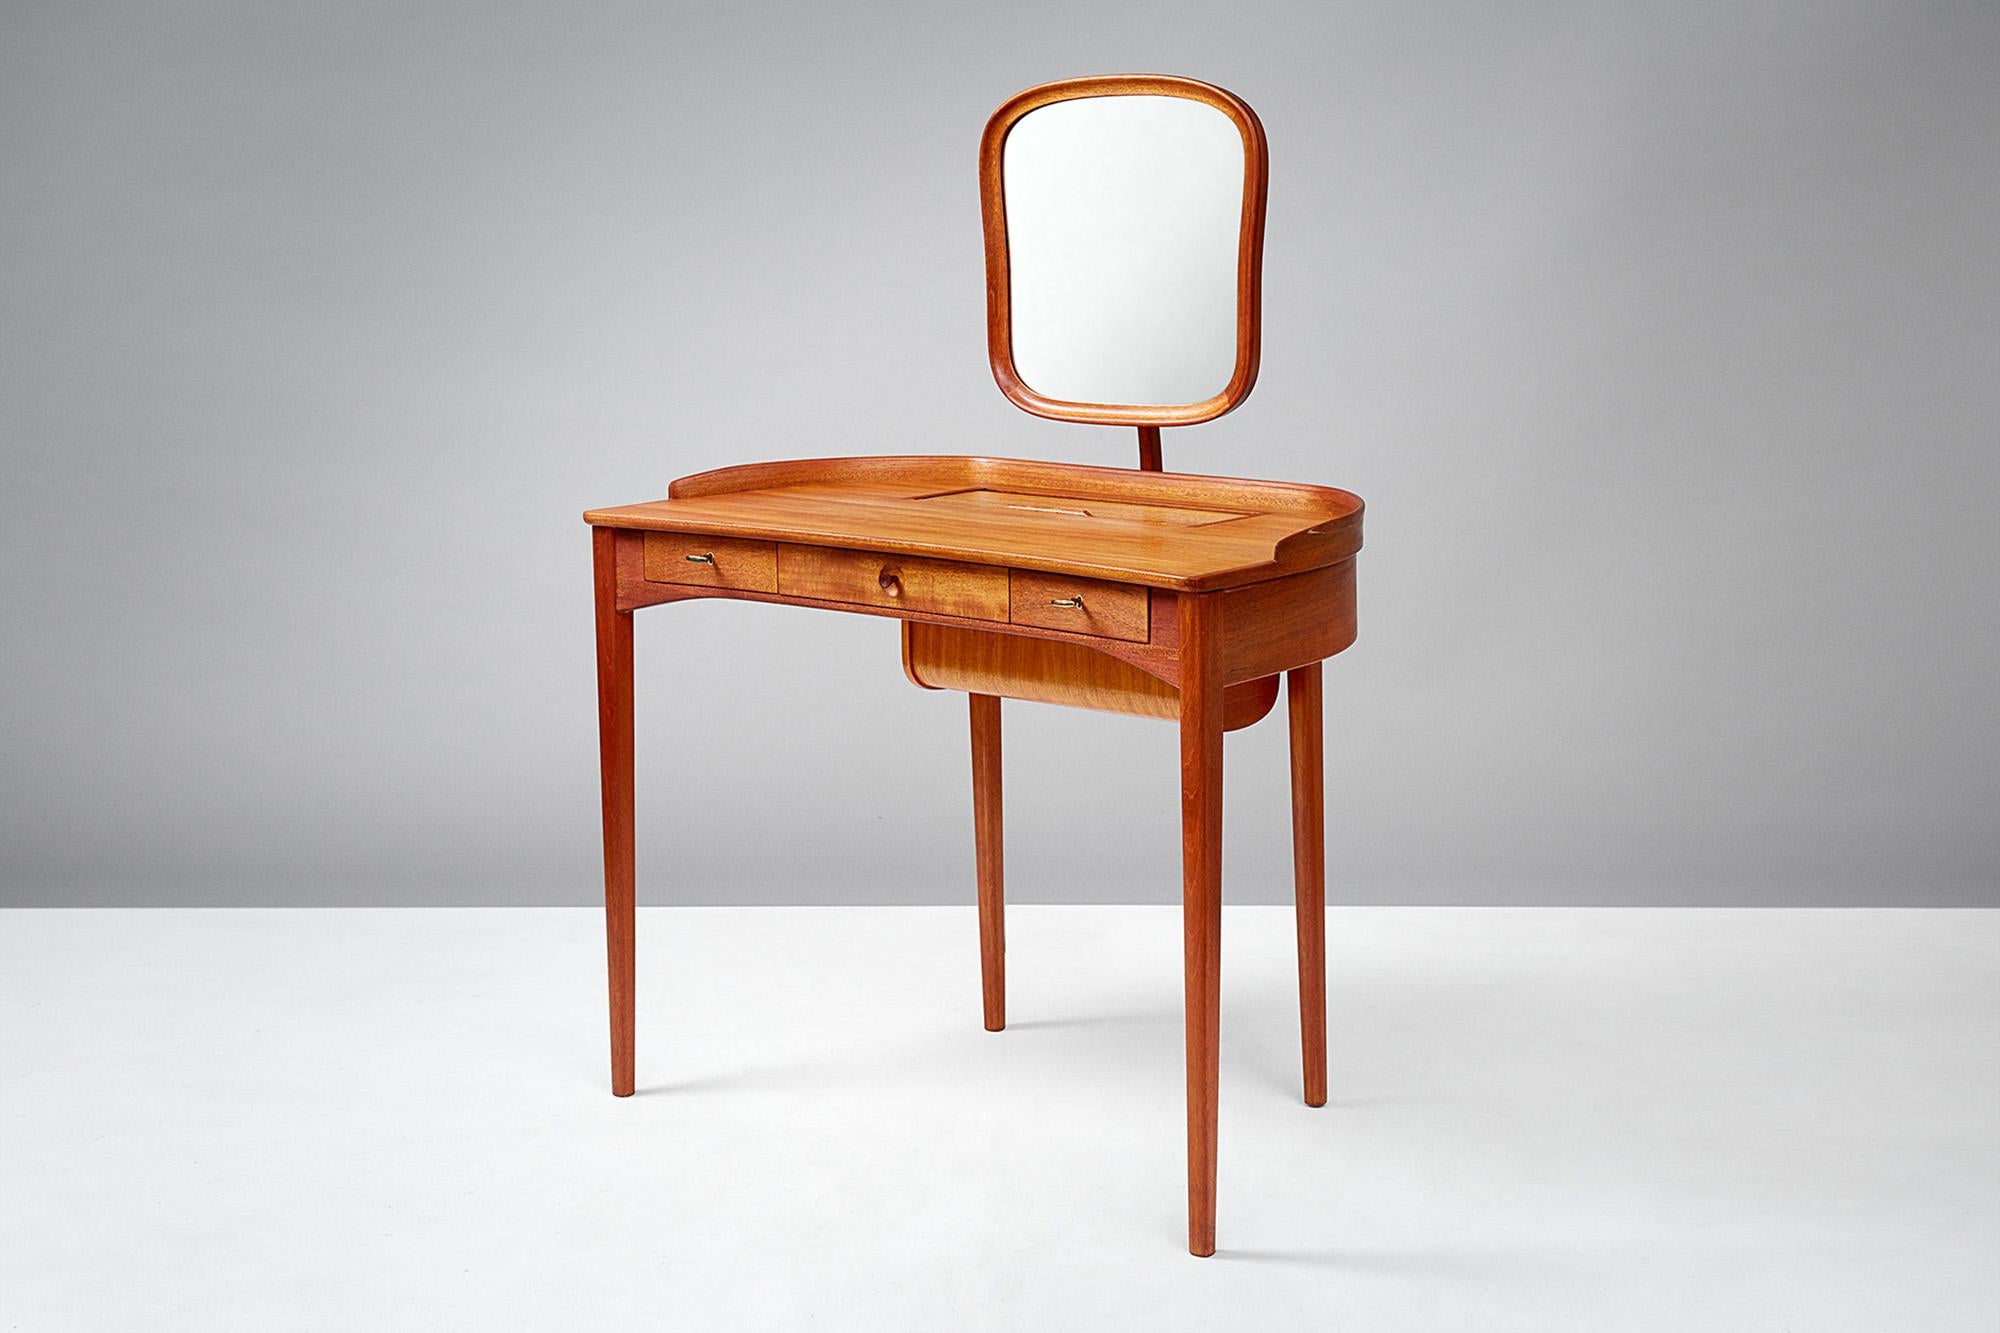 Carl Malmsten

Birgitta Dressing Table, 1964

Exquisite dressing table produced by Bodafors, Sweden in light mahogany and designed by Swedish master Carl Malmsten. Adjustable mirror with brass fittings, 3 front drawers with original keys.